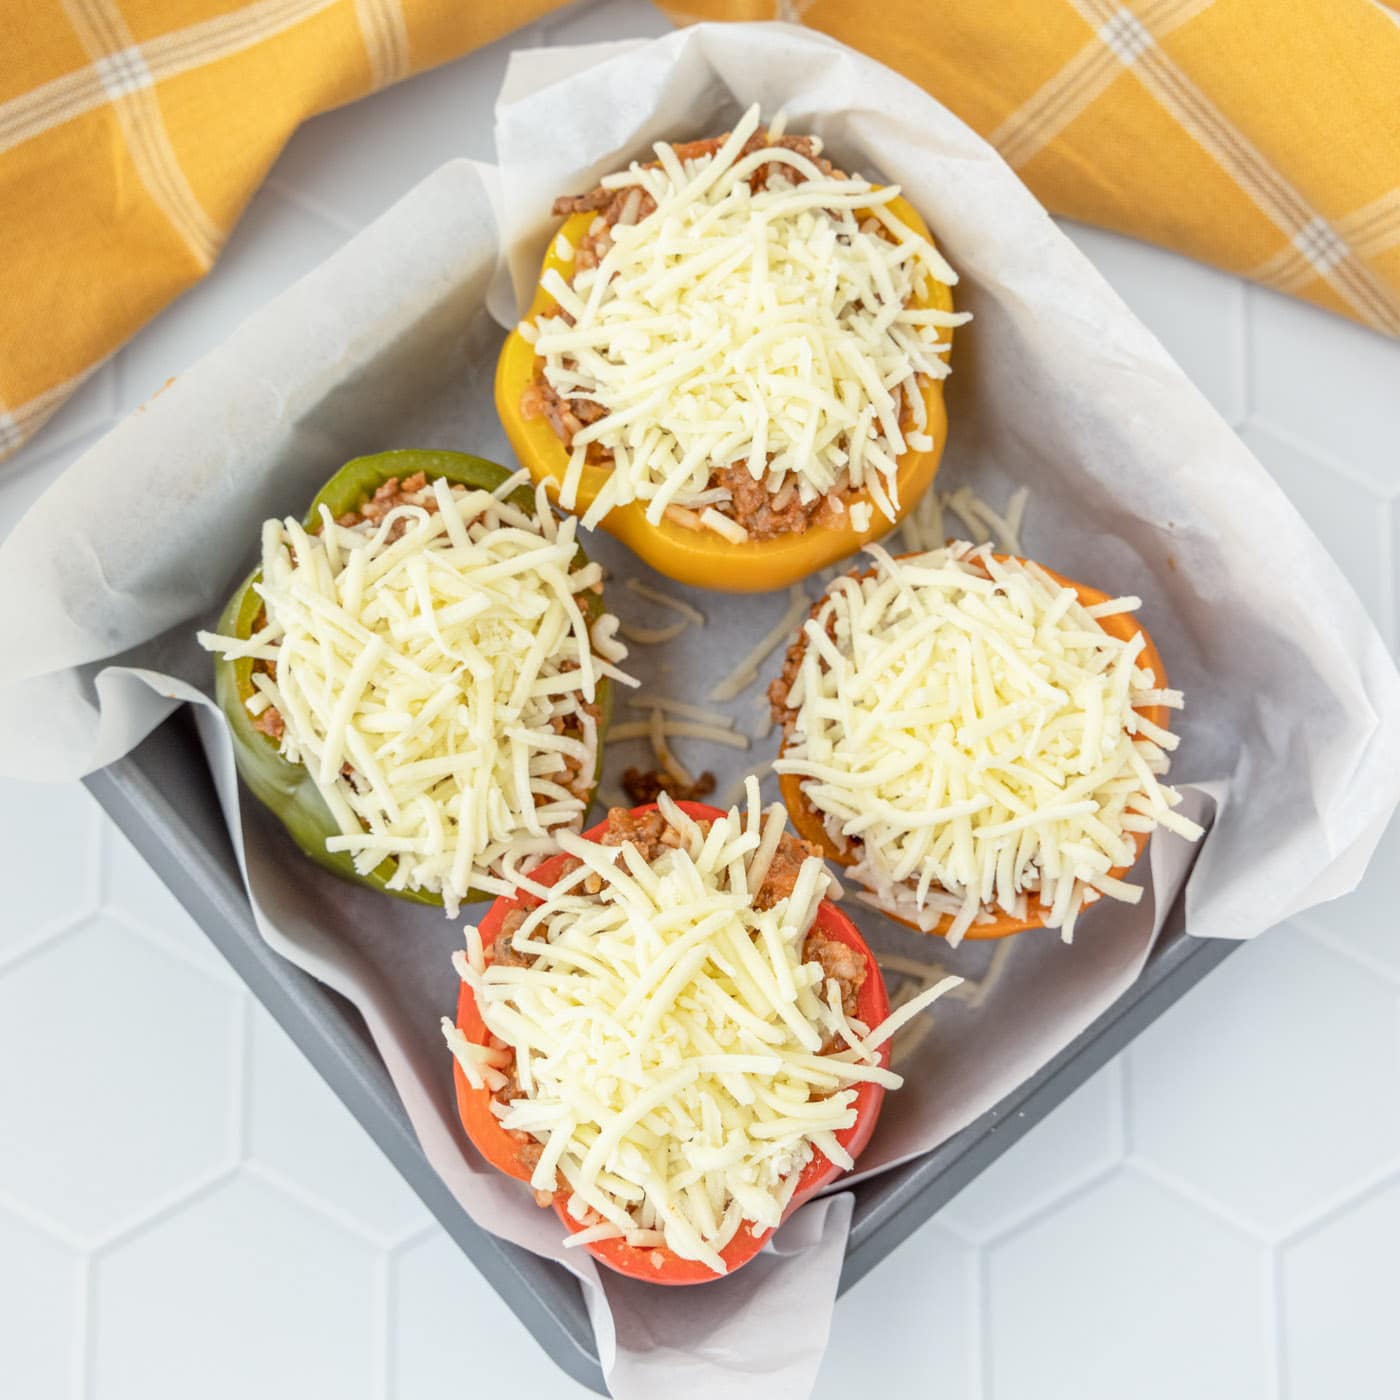 stuffed peppers with cheese in a baking dish